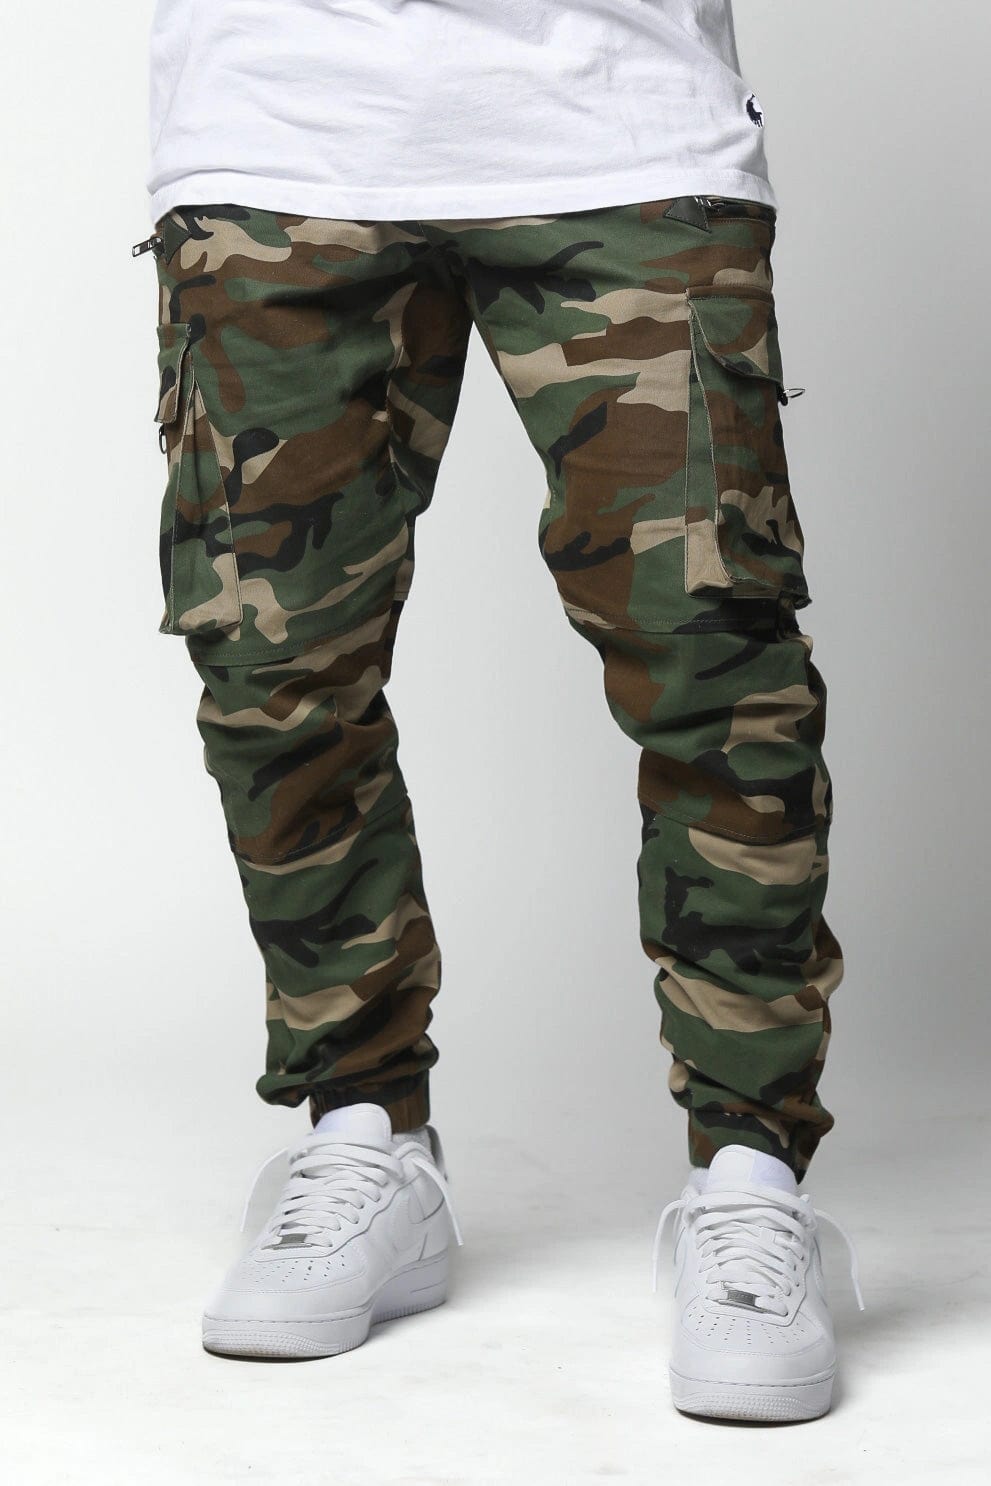 Norway Army Camoflage cargo pants-